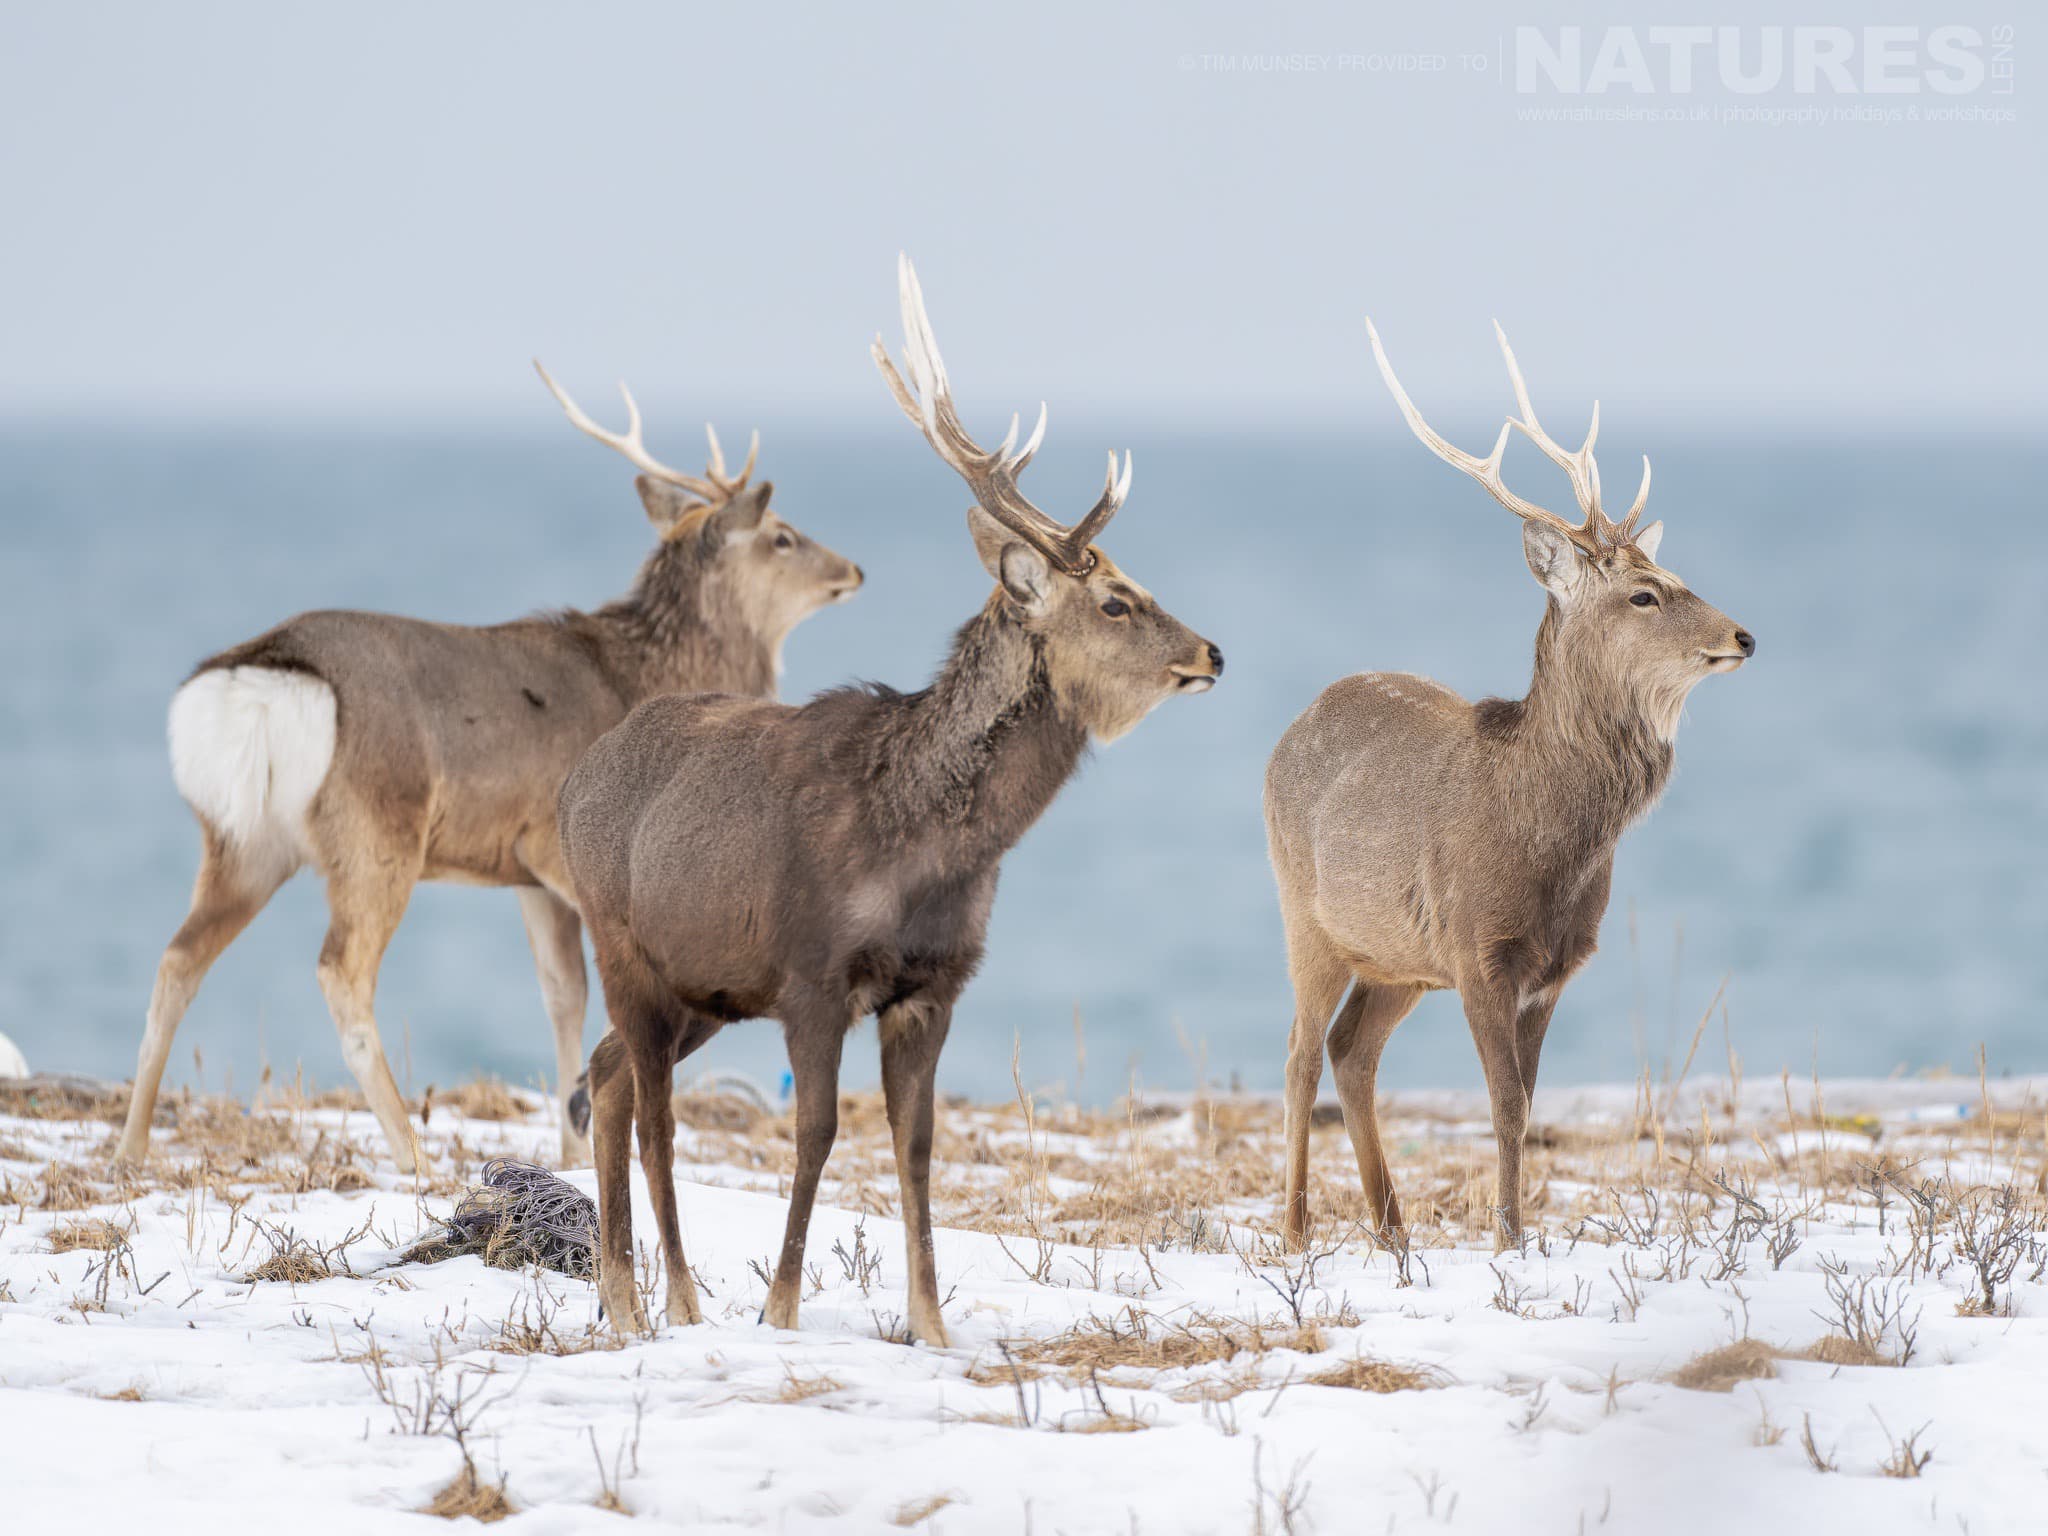 A Trio Of Japanese Sika Deer On A Snow Covered Penninsula One Of The Species Featured During Our Japan's Winter Wildlife Photography Holiday.jpg